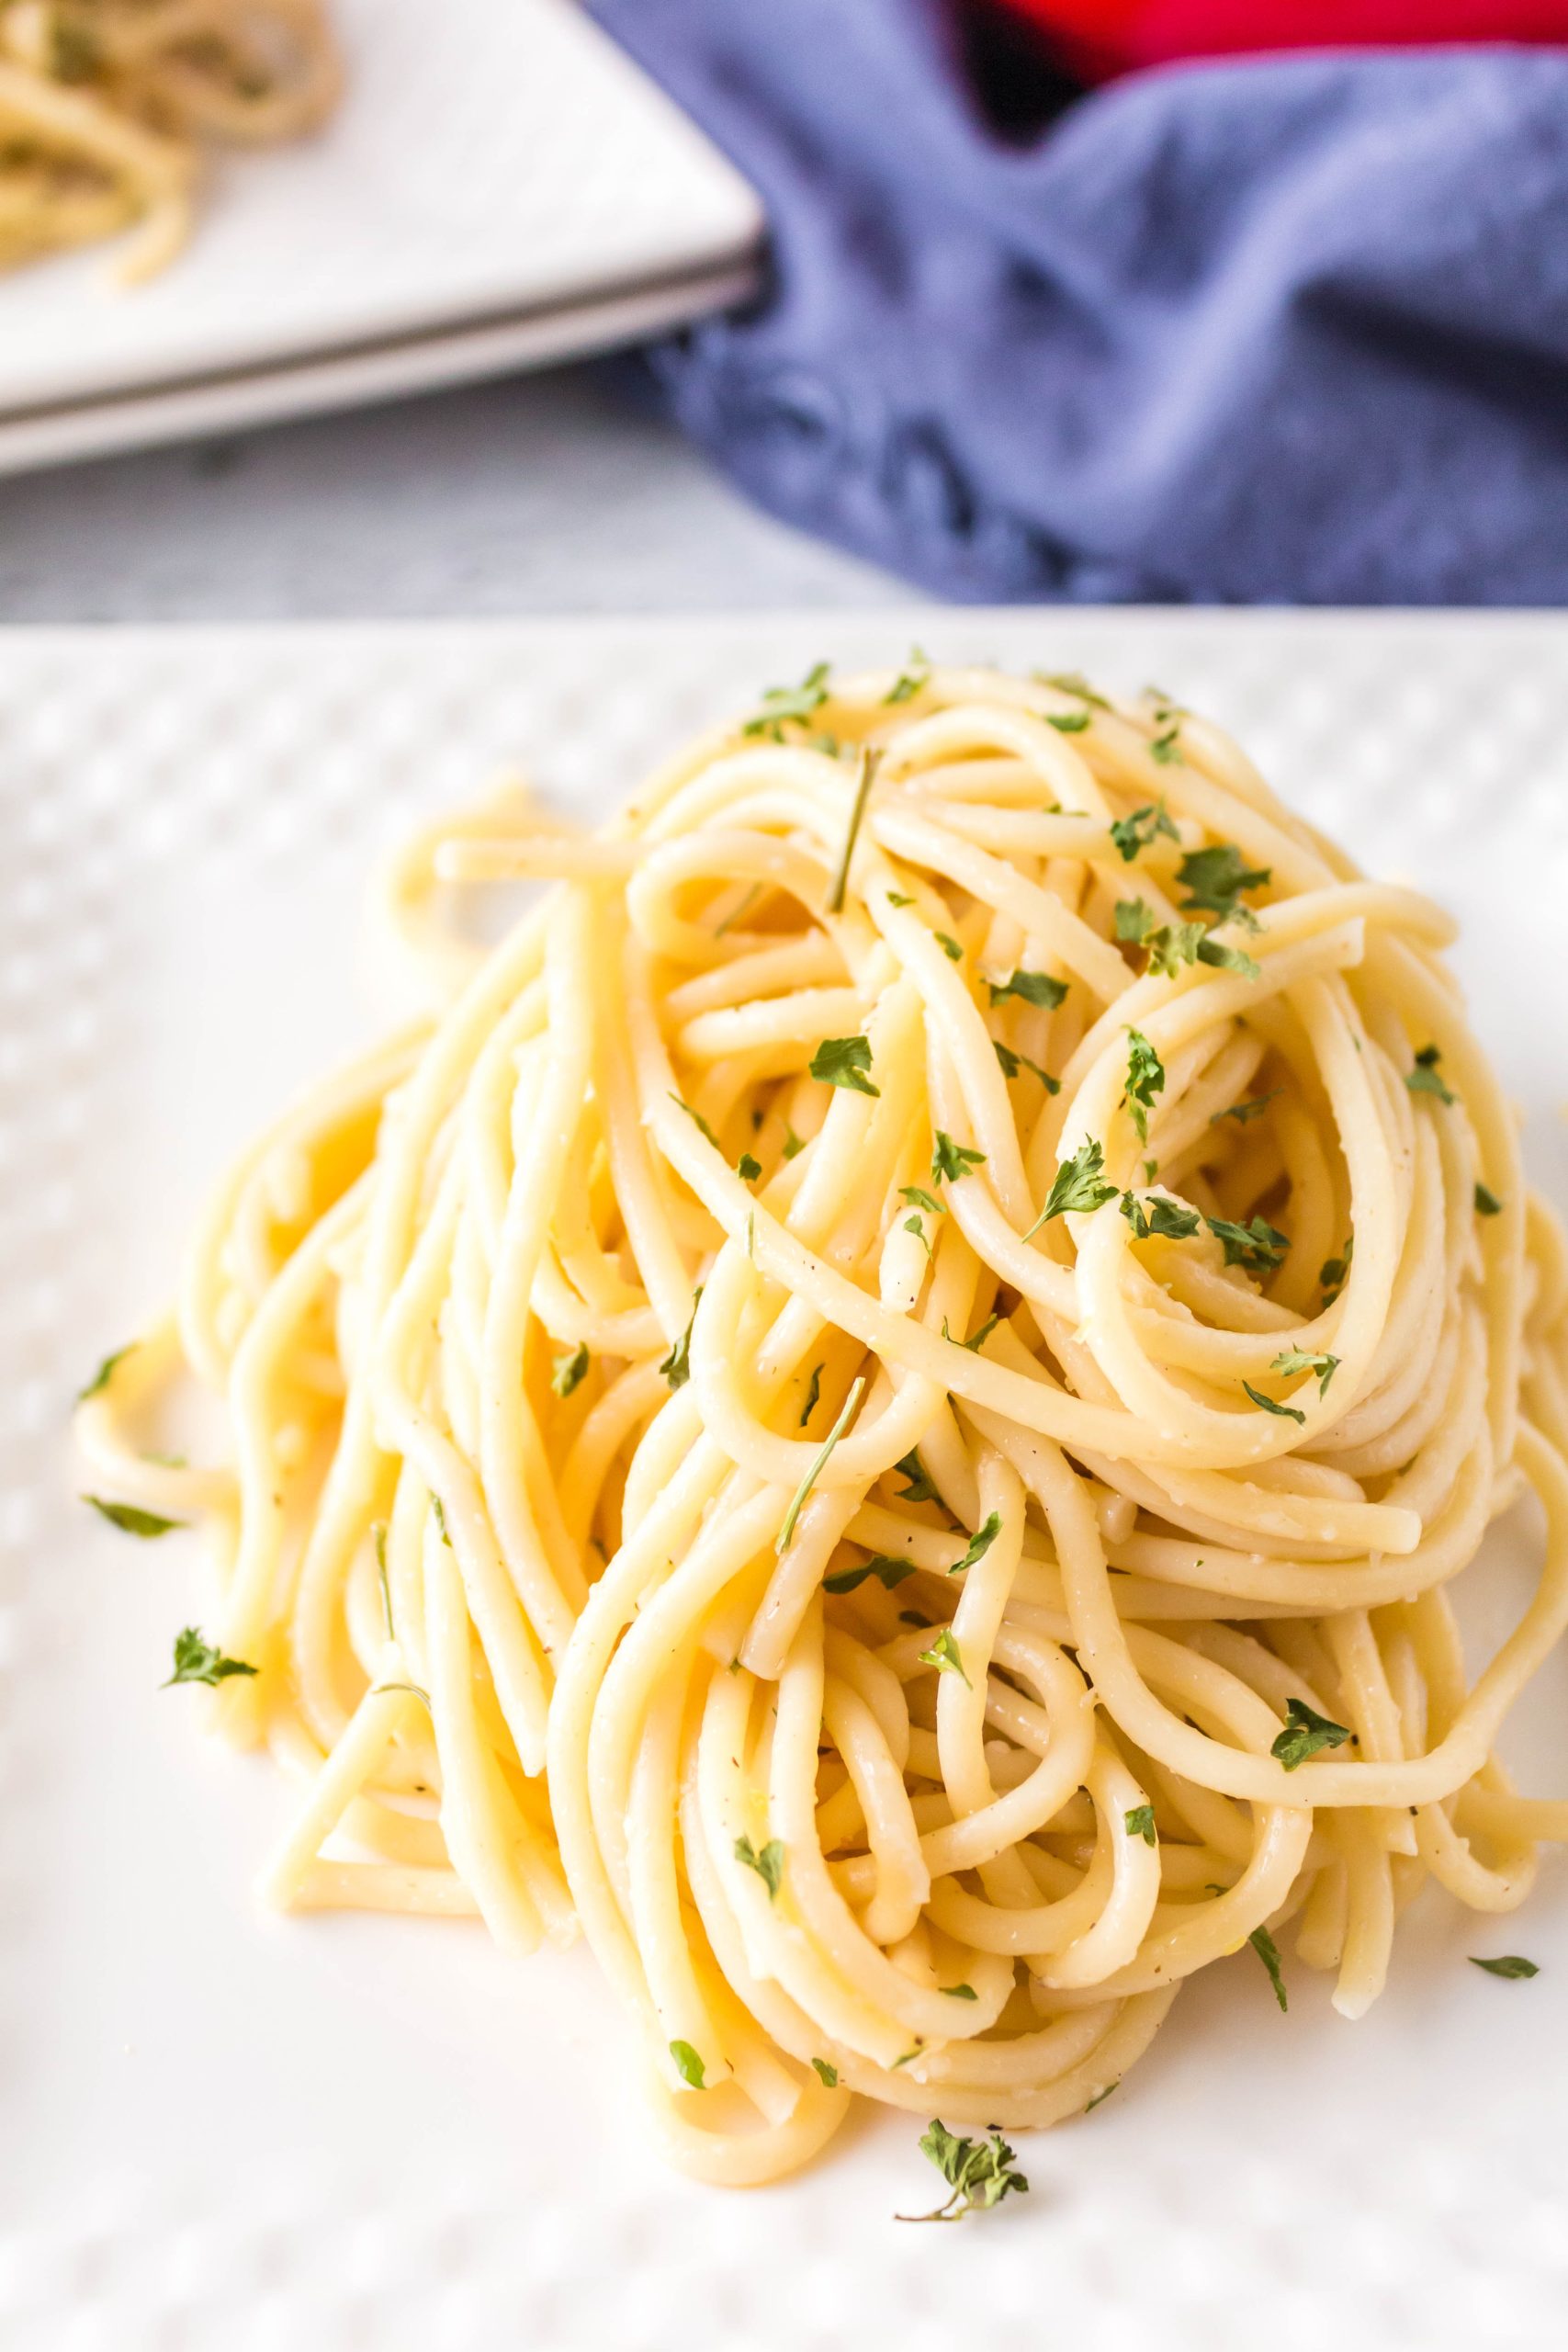 A plate of lemon garlic butter pasta with herbs on it.